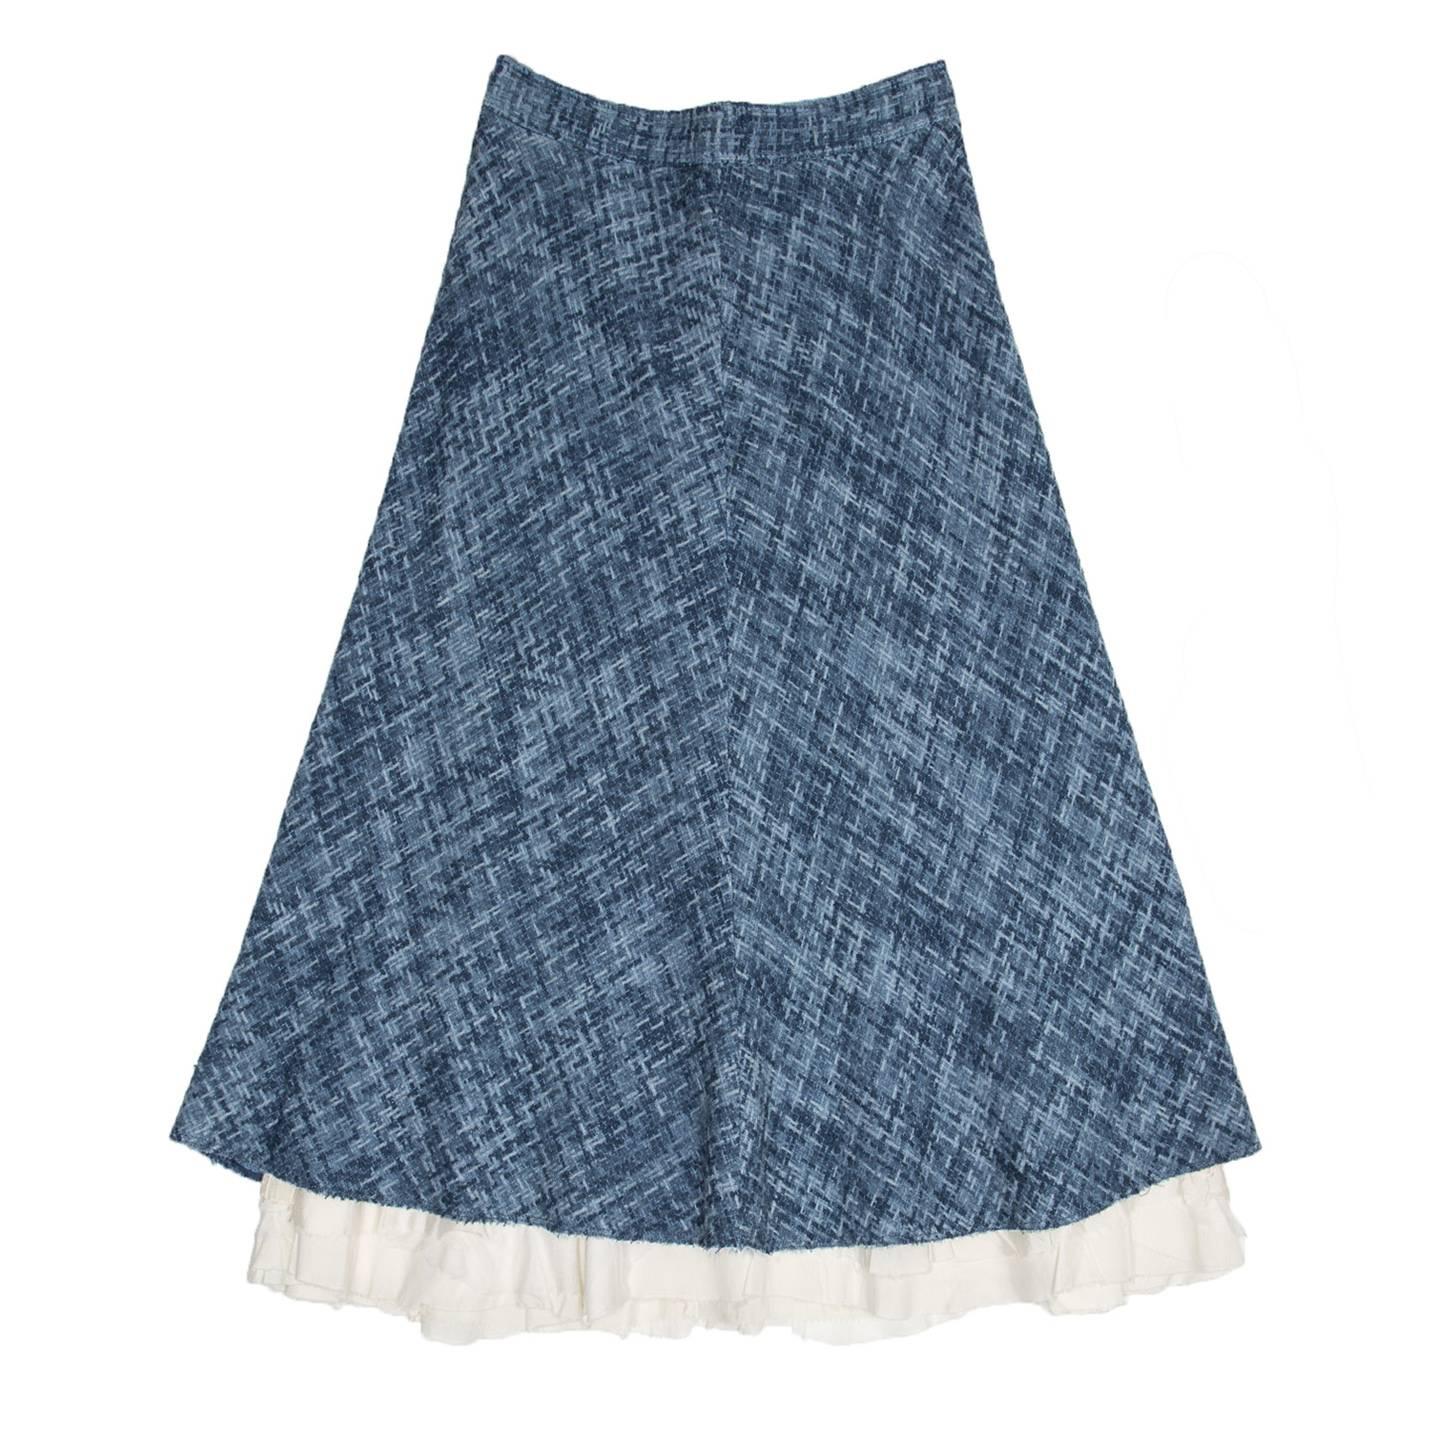 Melange of different shades of sky blue woven chenille like cotton stripes. The skirt is high waisted, ankle length with ivory inserts at hem and it has an a-line volume. Made in U.S.A.

Size  10 US sizing

Condition  Excellent: worn a few times (it